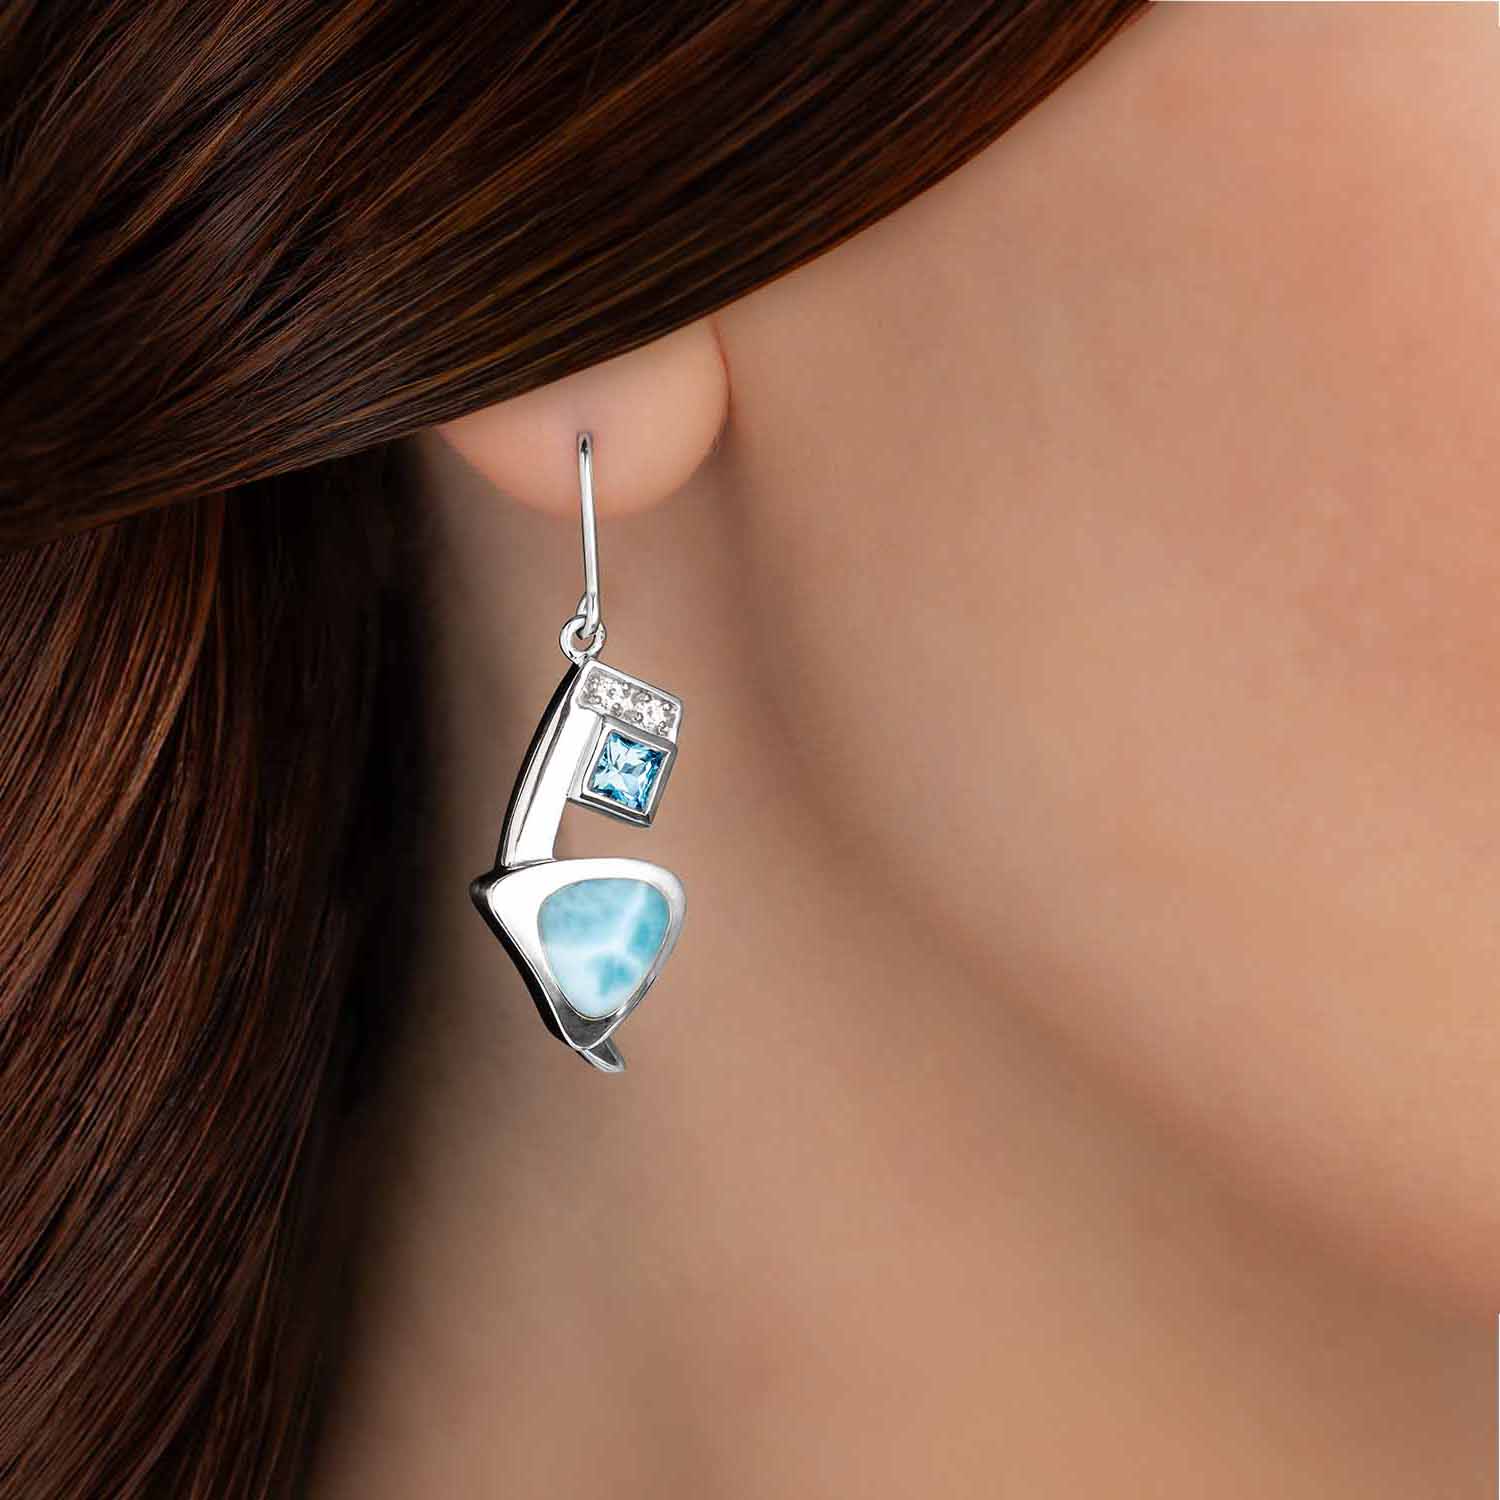 Designer Earrings with topaz and larimar  by marahlago